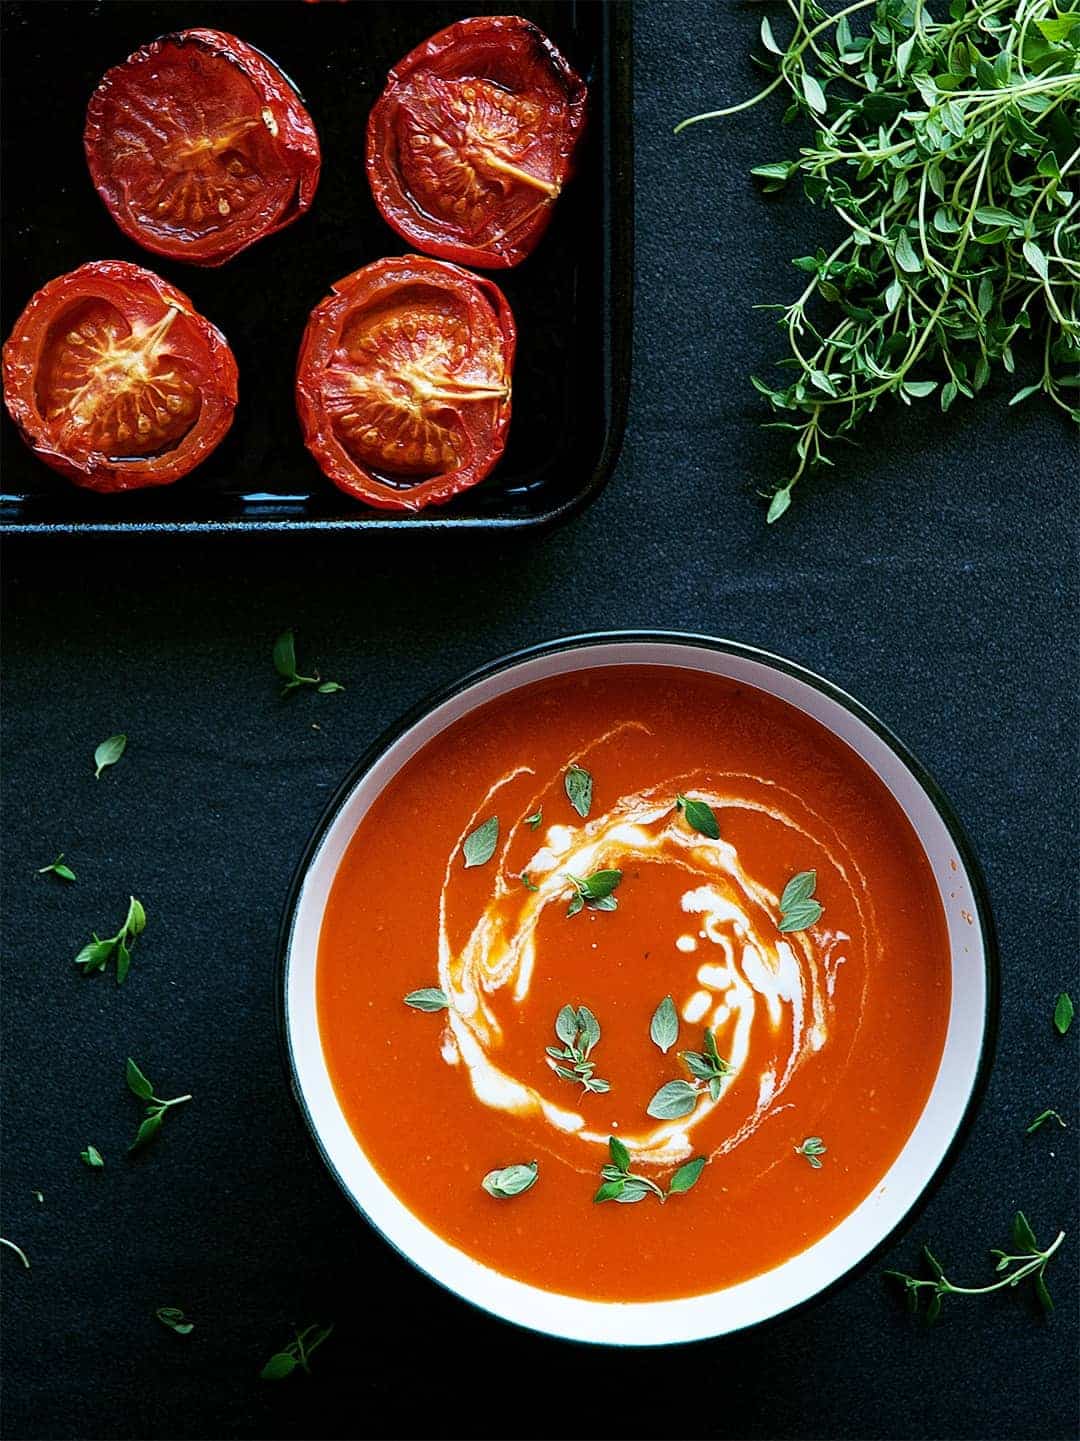 HOMEMADE ROASTED TOMATO SOUP from https://www.allkitchencolours.com/